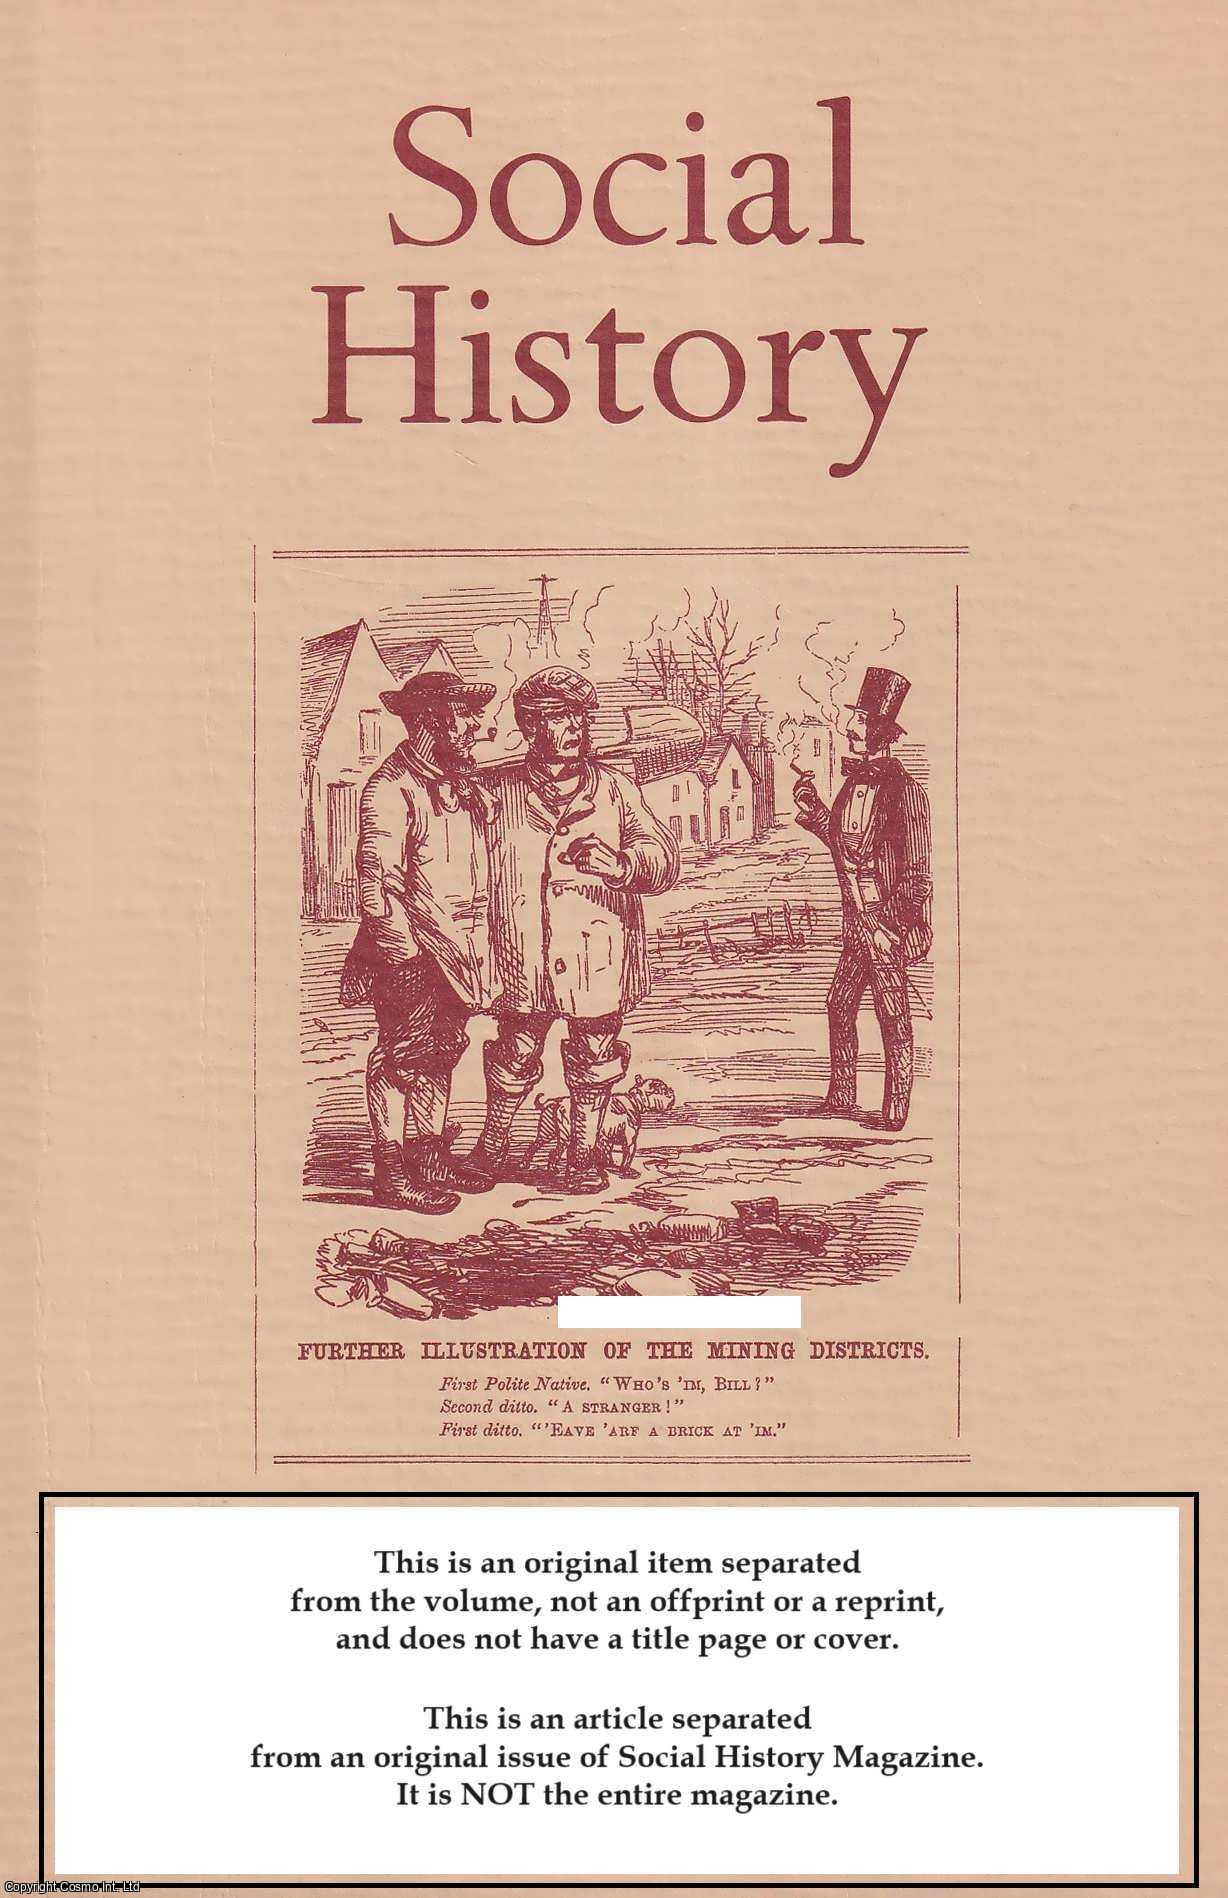 Judith Spicksley - The Social and Cultural History of Early Modern England: New Approaches and Interpretations University of East Anglia, 24 April 2002. An original article from the Social History Journal, 2003.